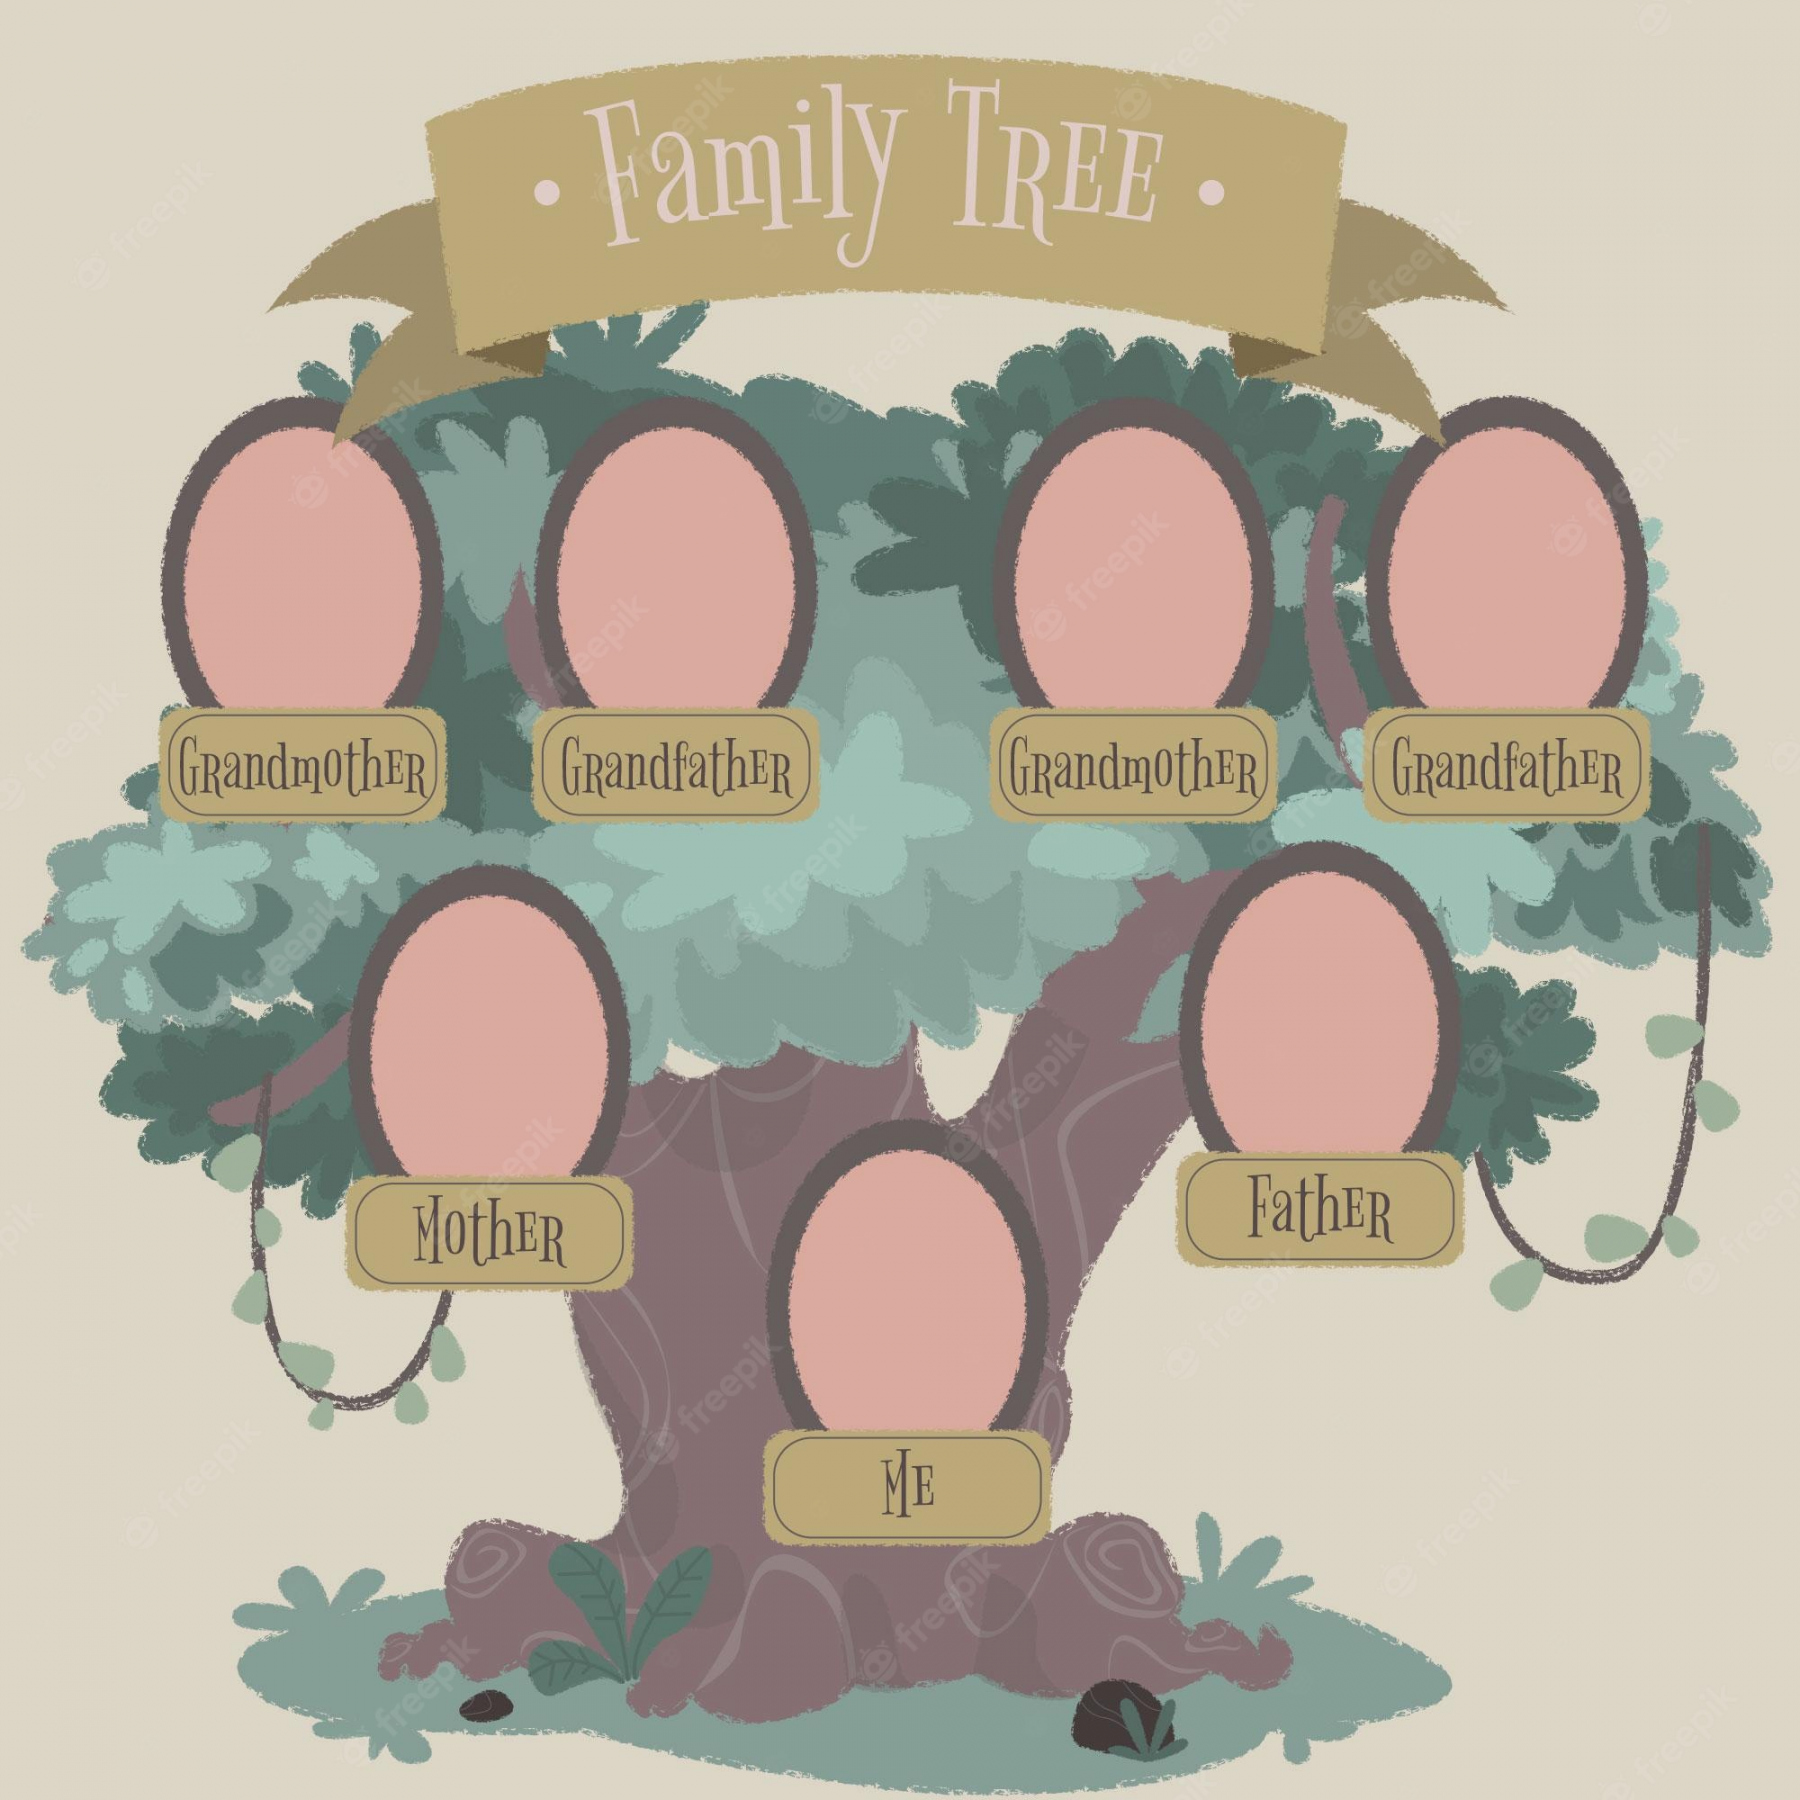 Family tree template Vectors & Illustrations for Free Download